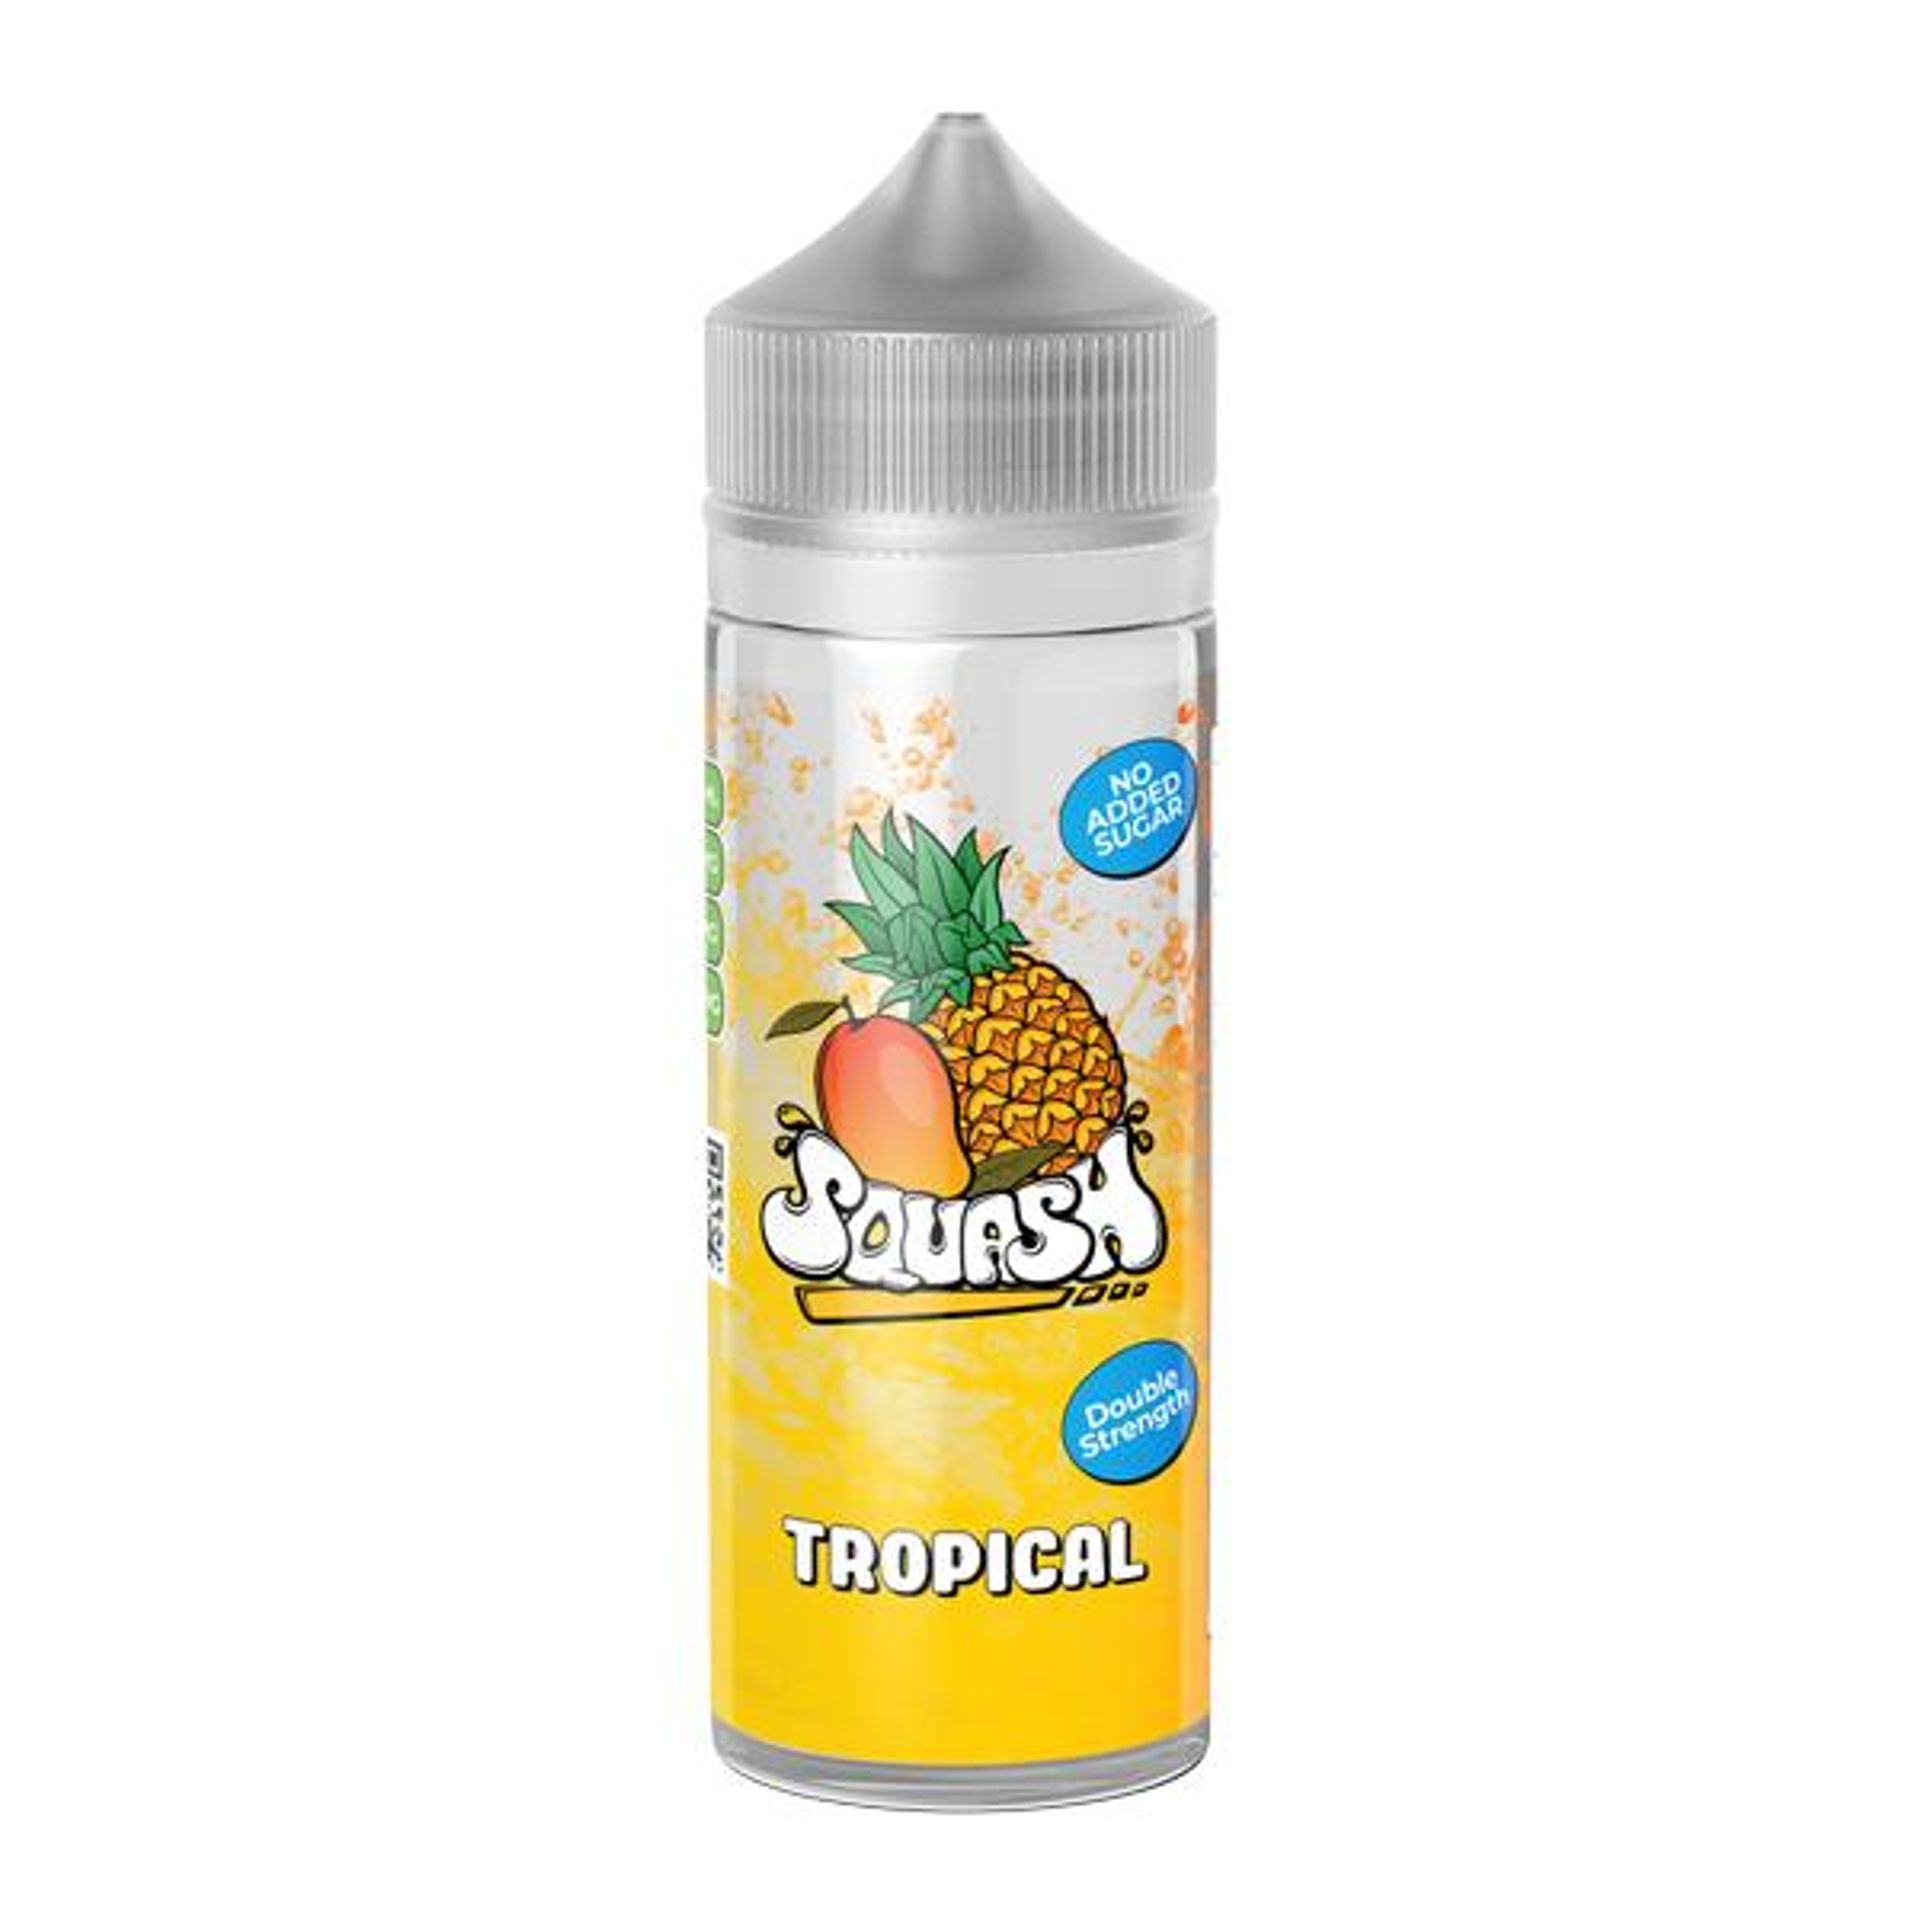 Image of Tropical by Squash